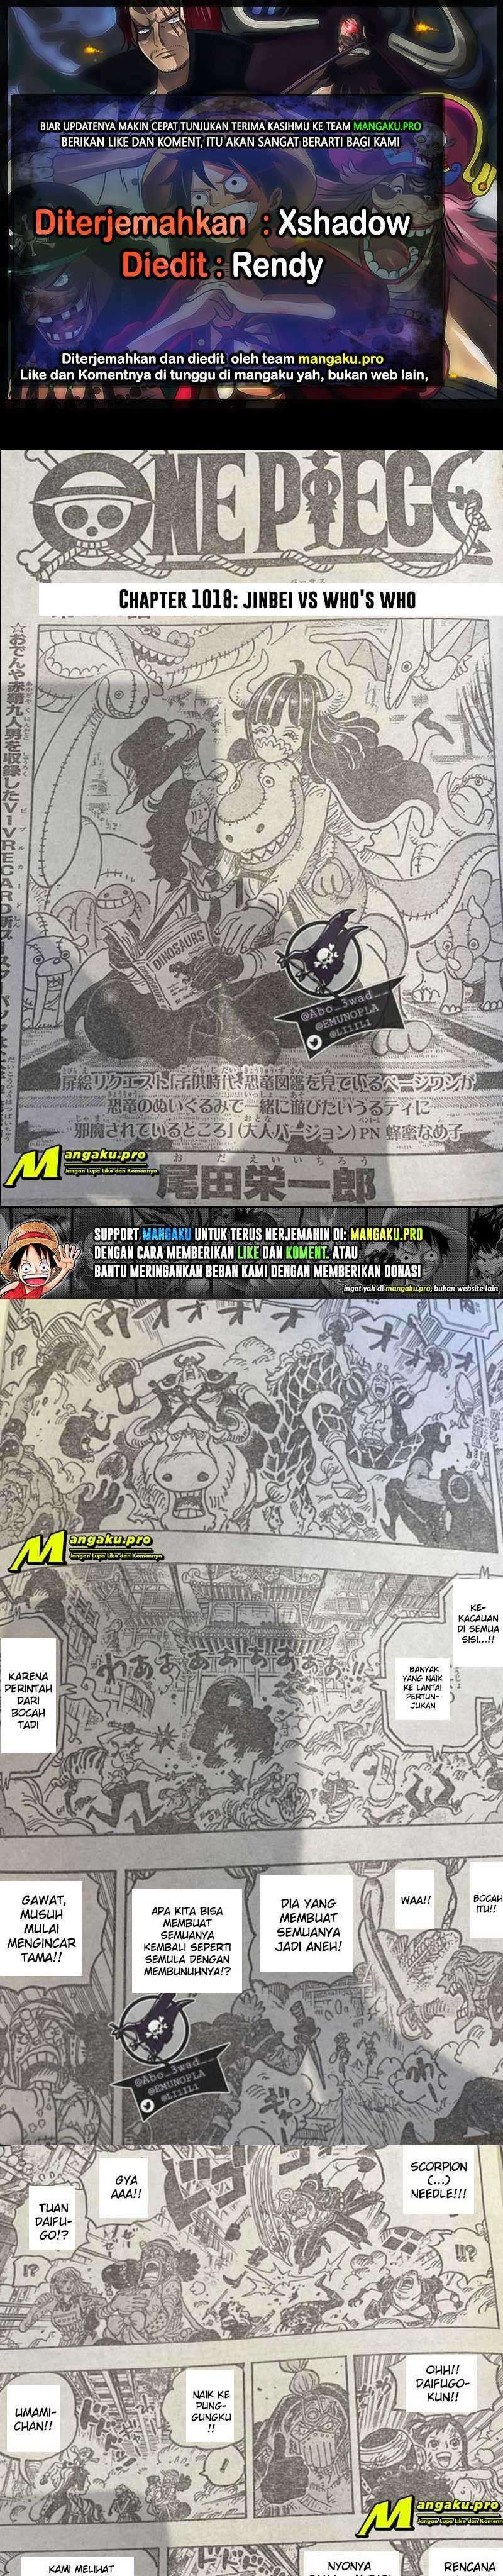 One Piece Chapter 1018 Lq - 37